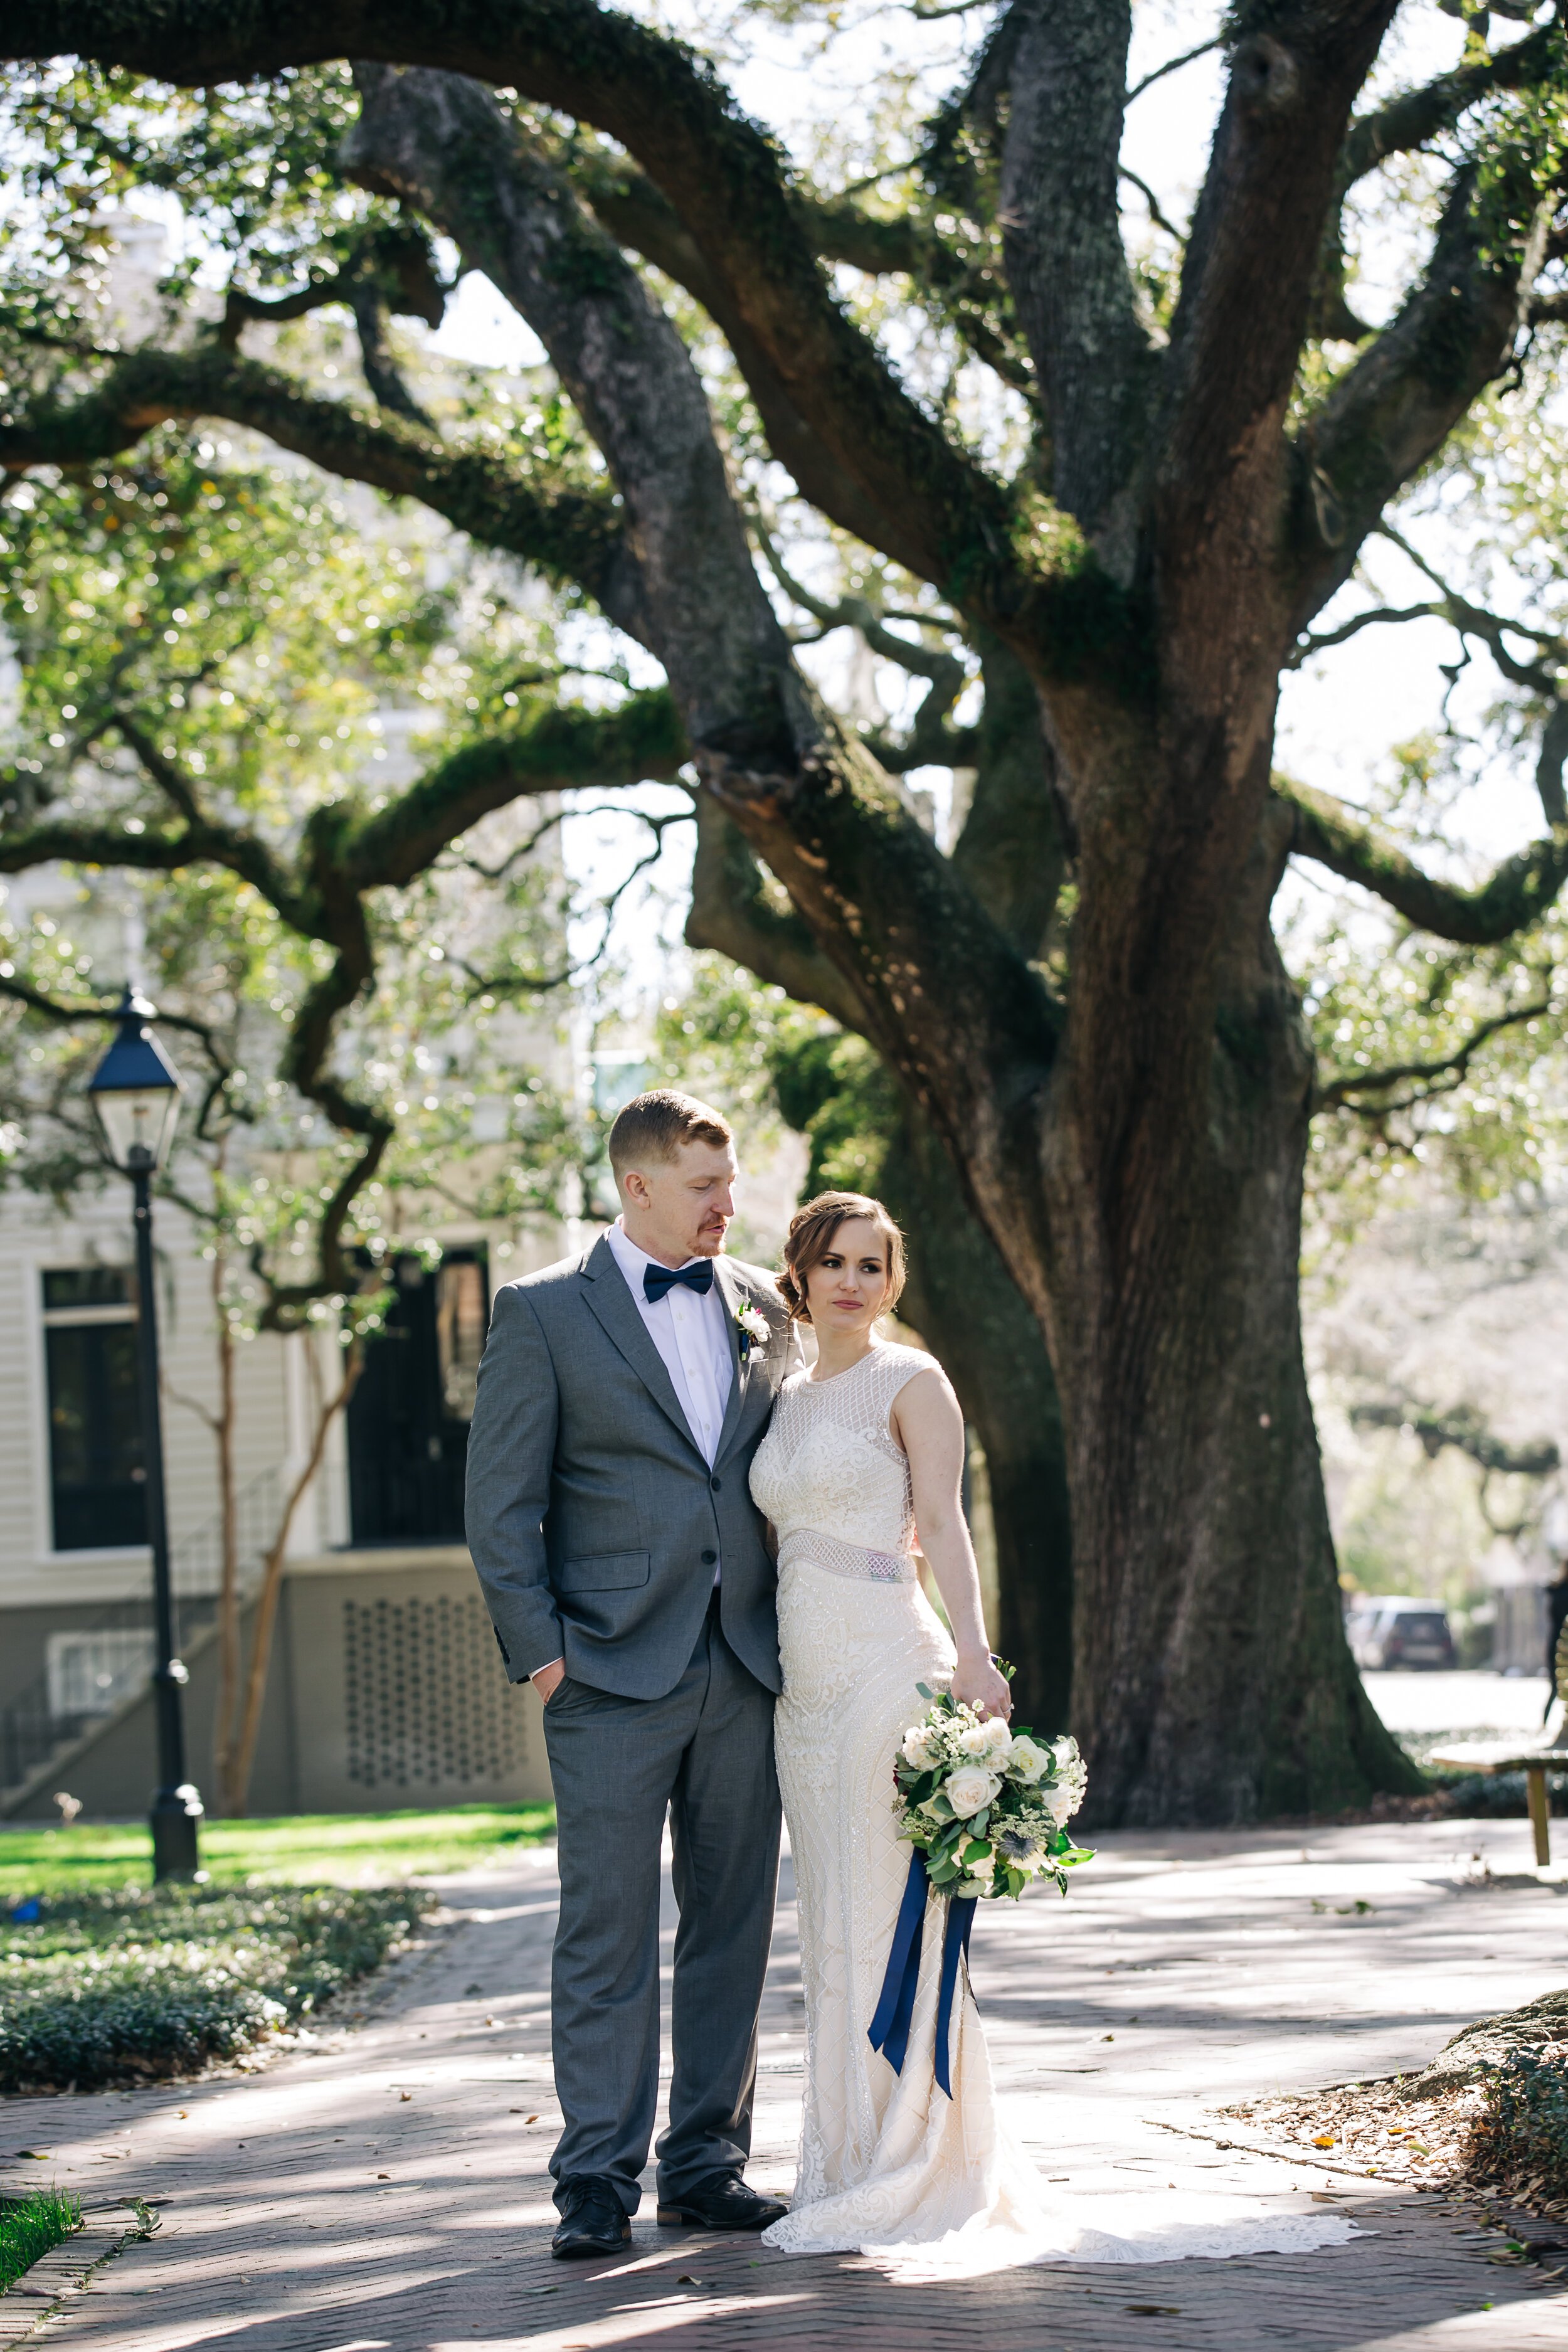 ivory-and-beau-florals-wedding-flowers-wedding-florals-savannah-weddings-southern-weddings-florist-savannah-florist-floral-design-floral-designer-florist-in-savannah-real-wedding-in-savannah-wedding-blogFirst Look and Portraits-45.jpg